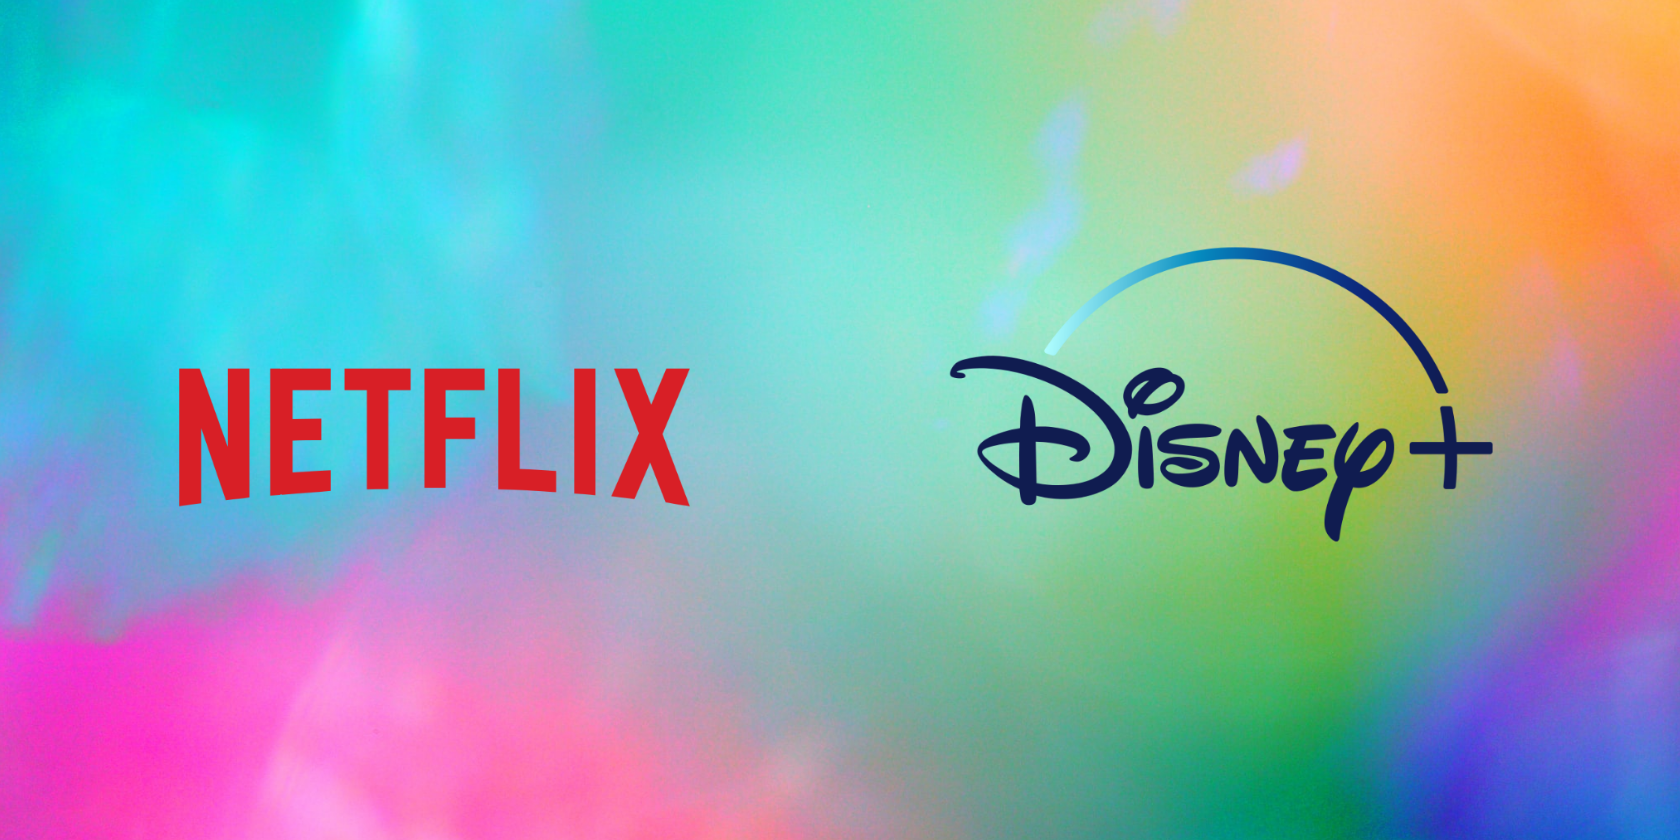 netflix and disney+ logos against a colorful background